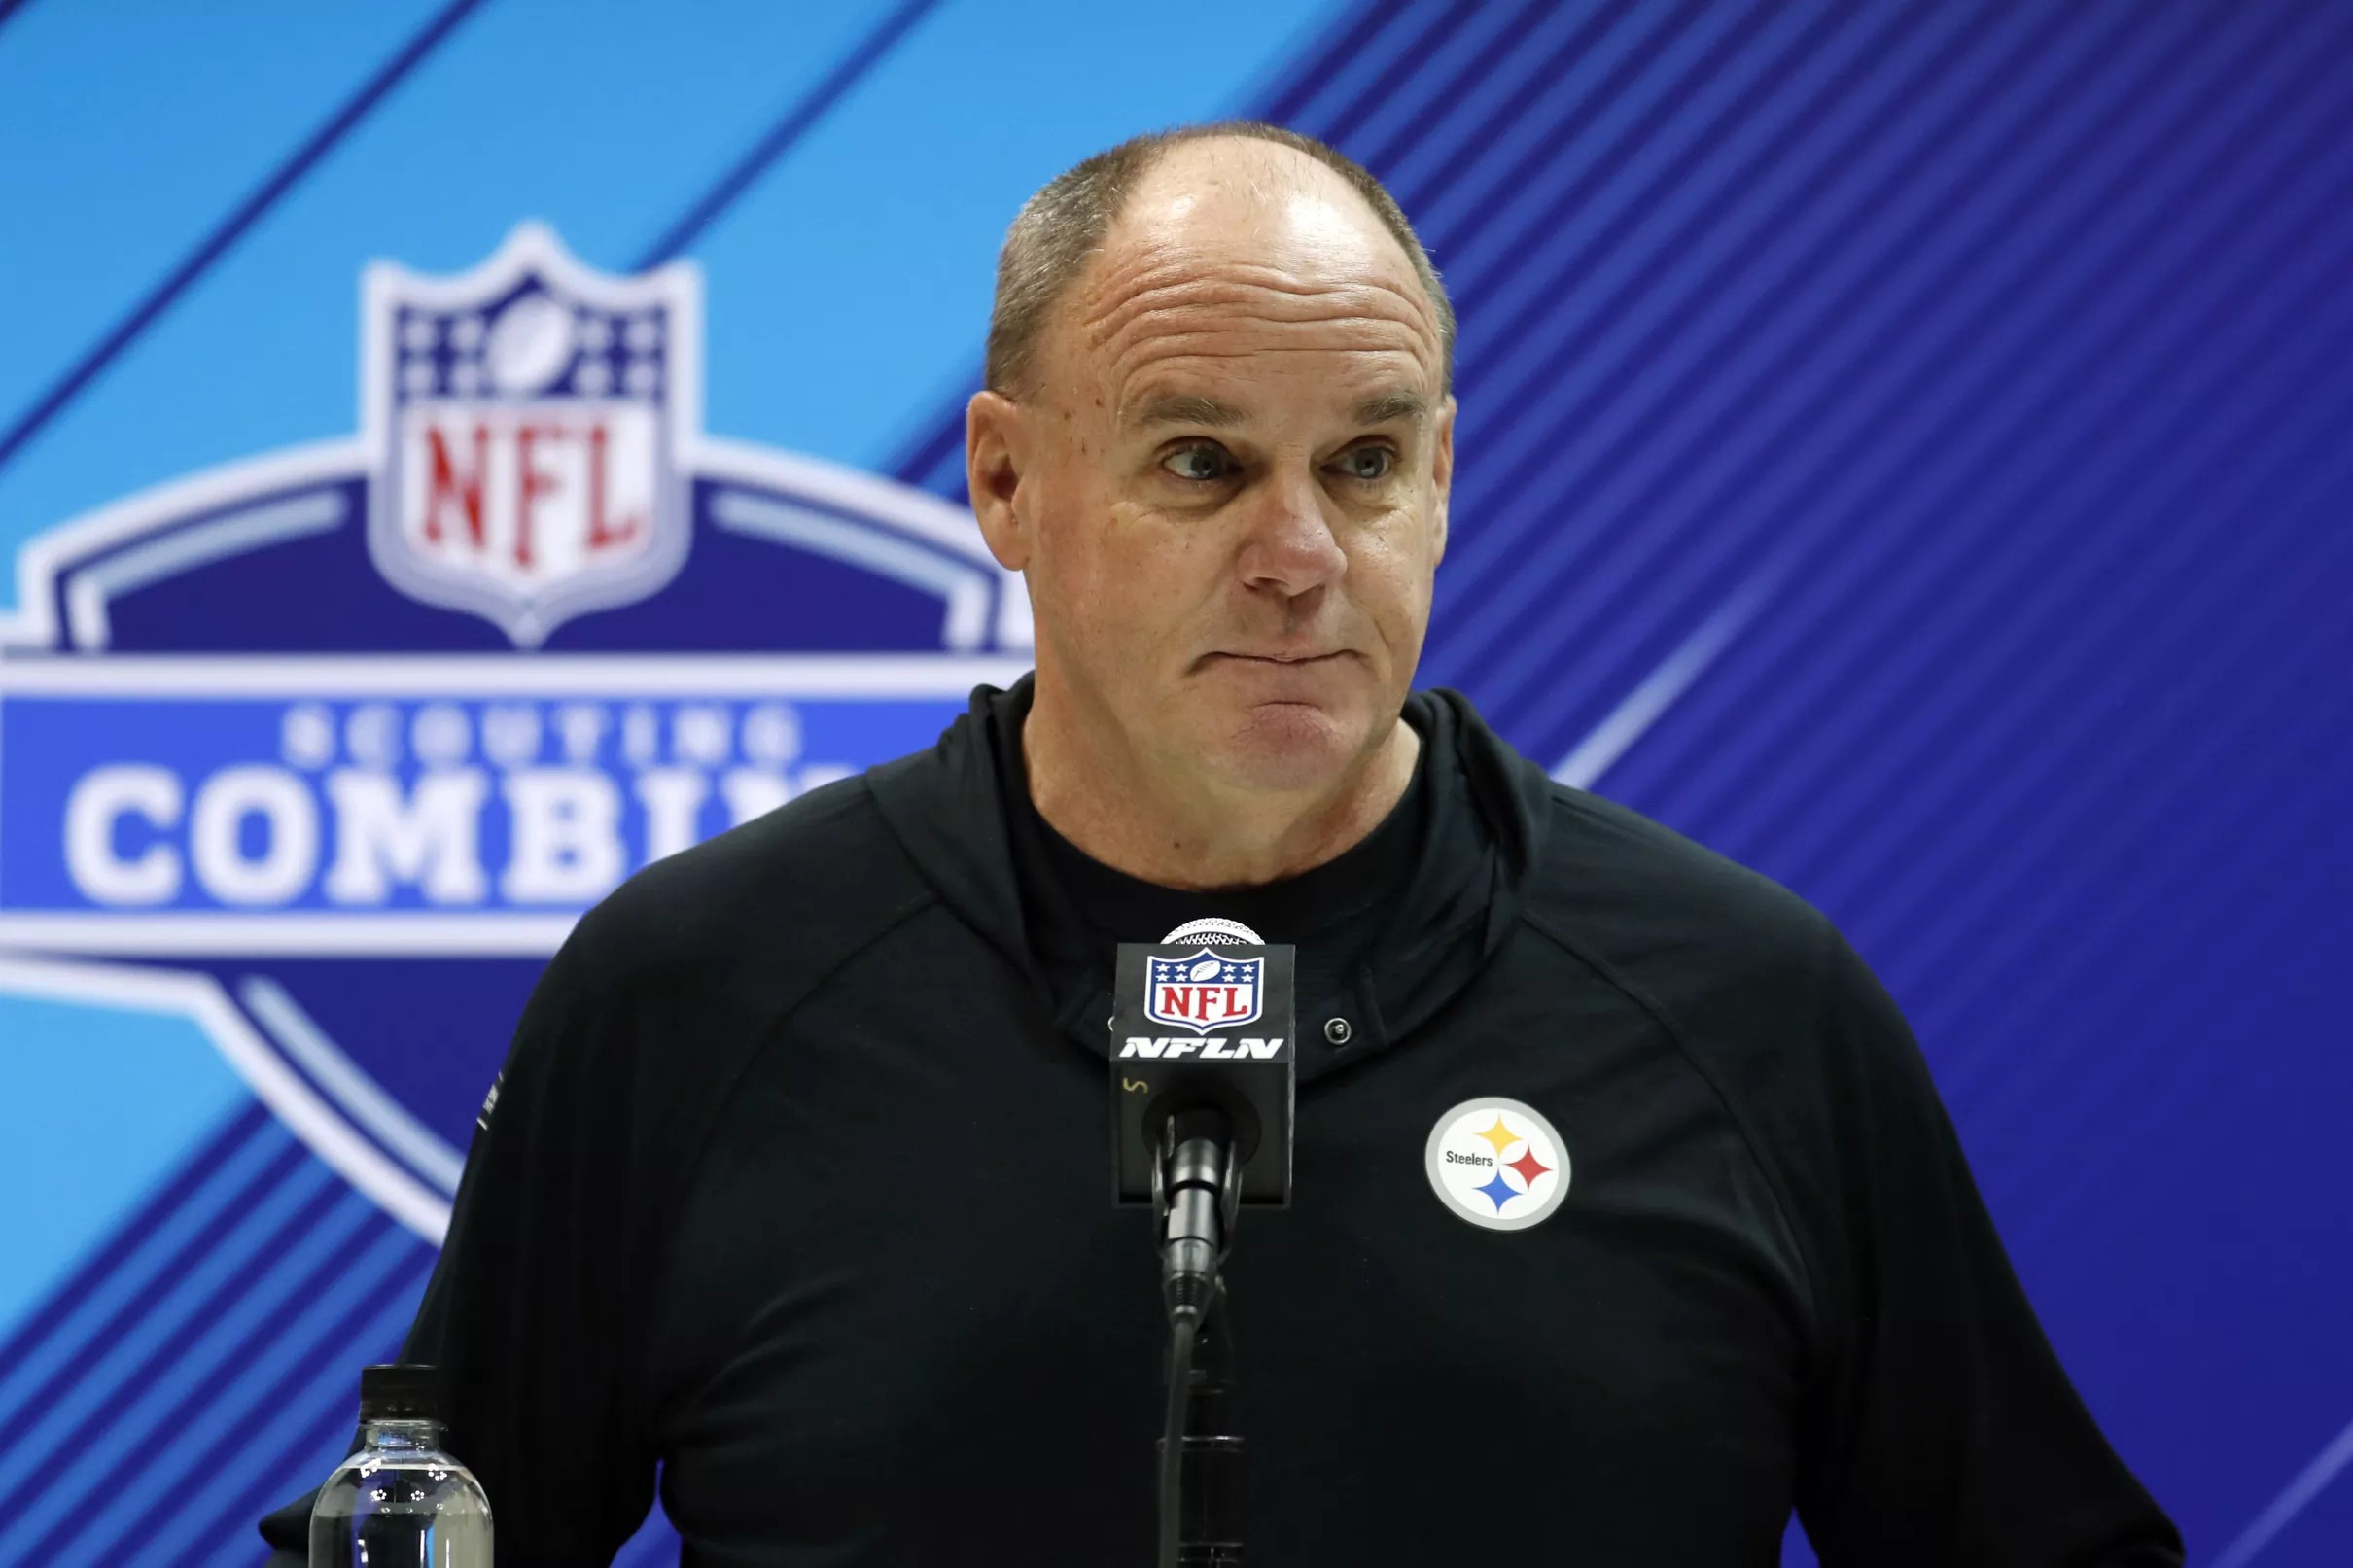 The NFL salary cap is expected to rise again heading into next season.